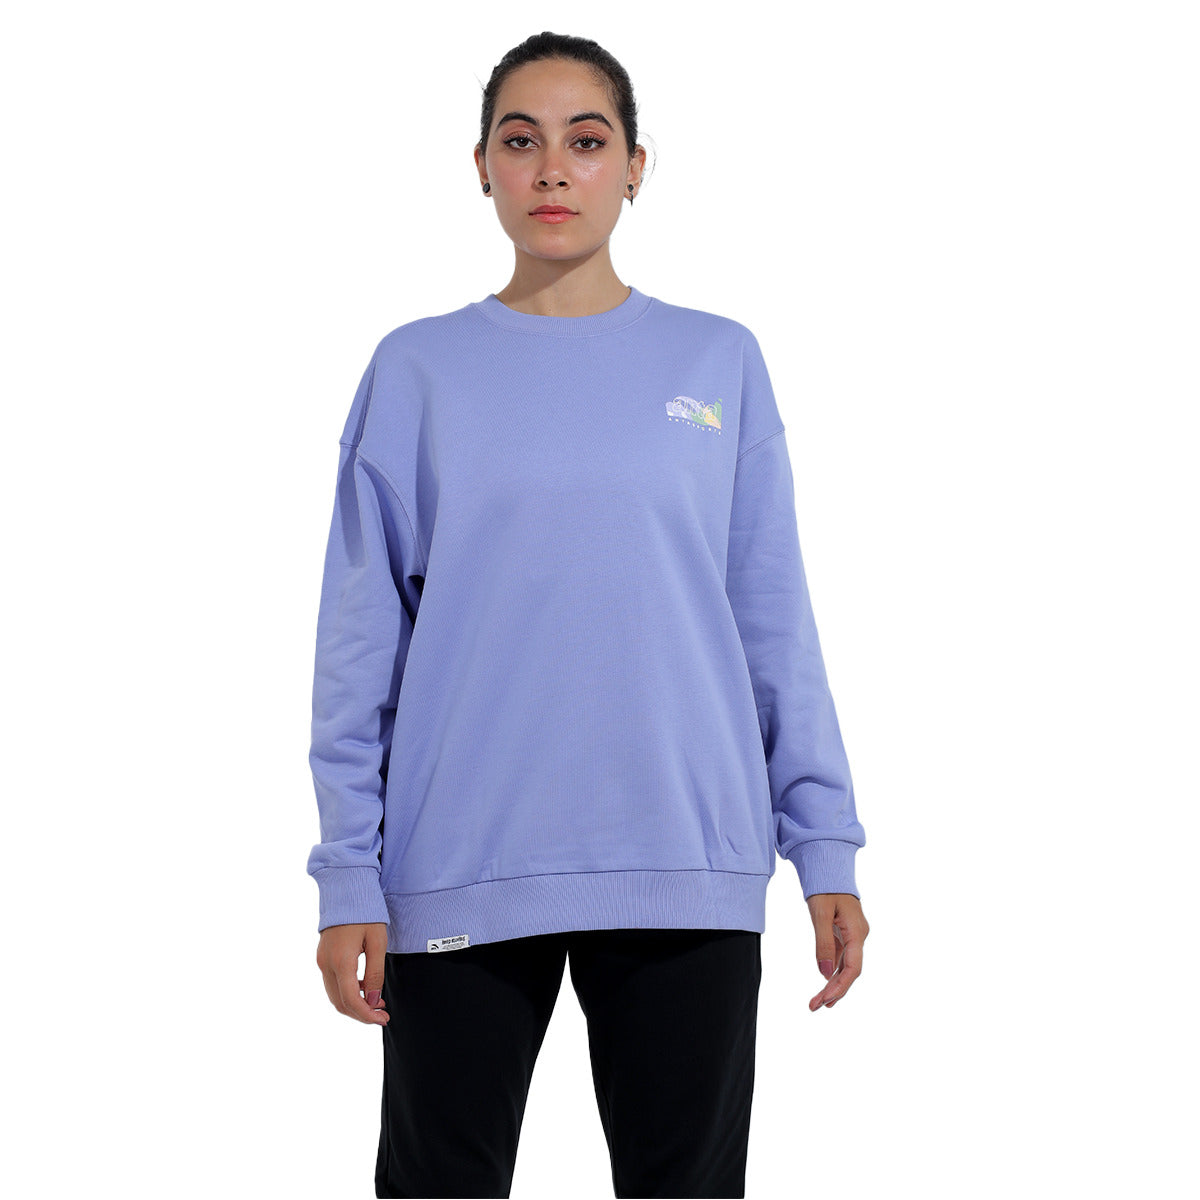 Anta Sweatshirt with Long Sleeves For Women, Blue